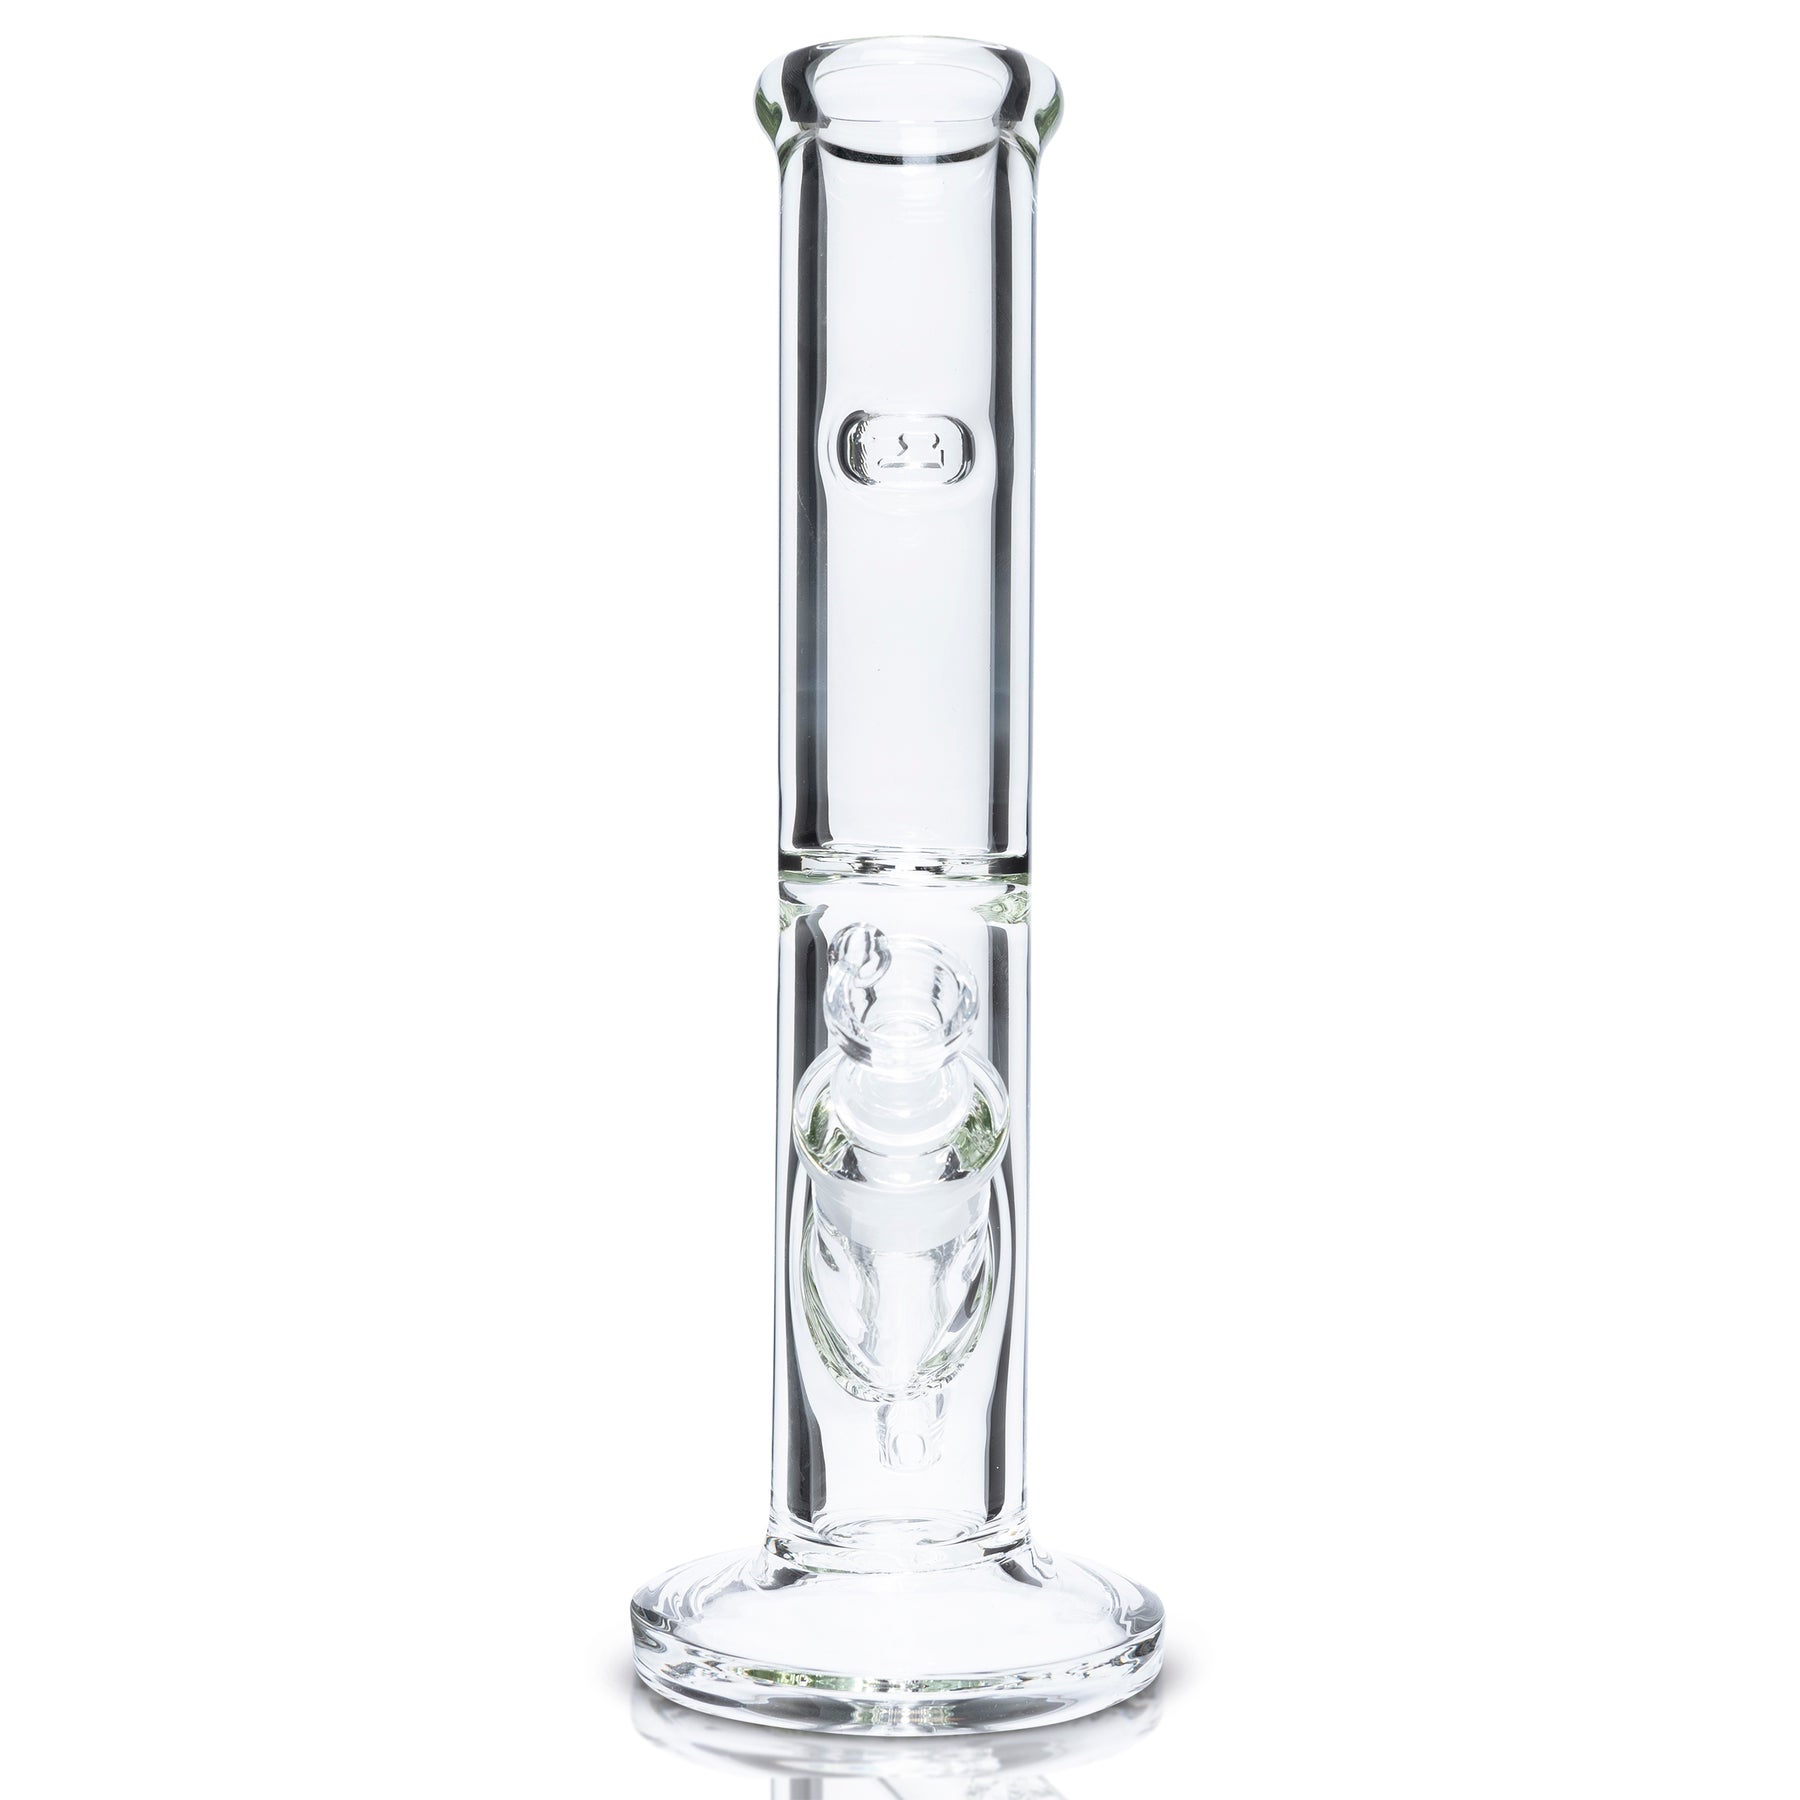 The Tank Straight Tube - 12 Inch